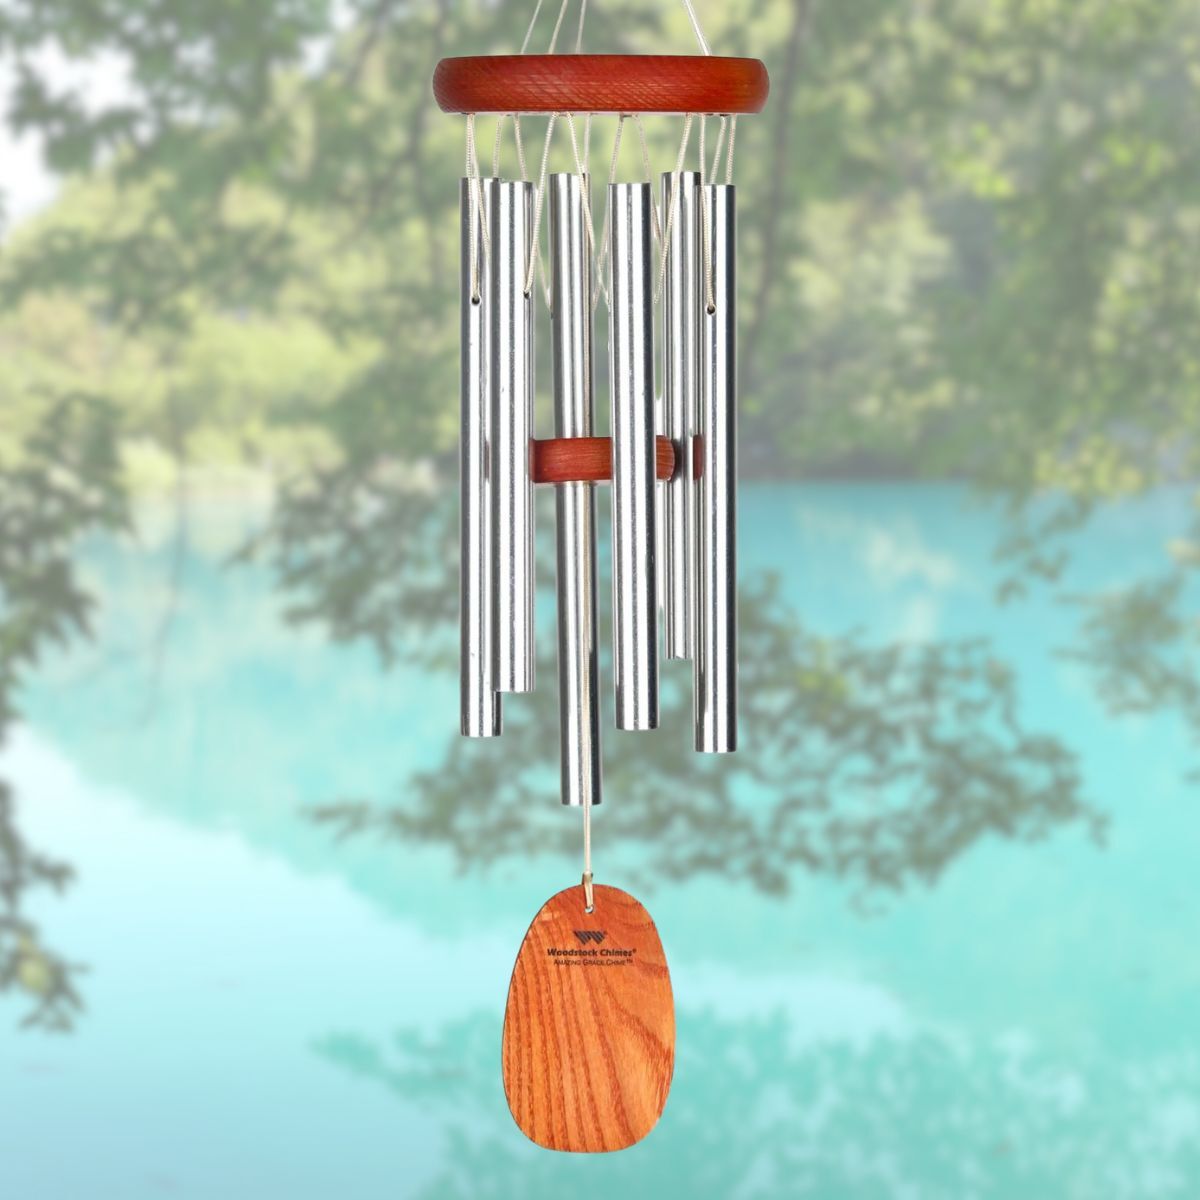 Amazing Grace 16 Inch Wind Chime - Engravable Sail - Silver